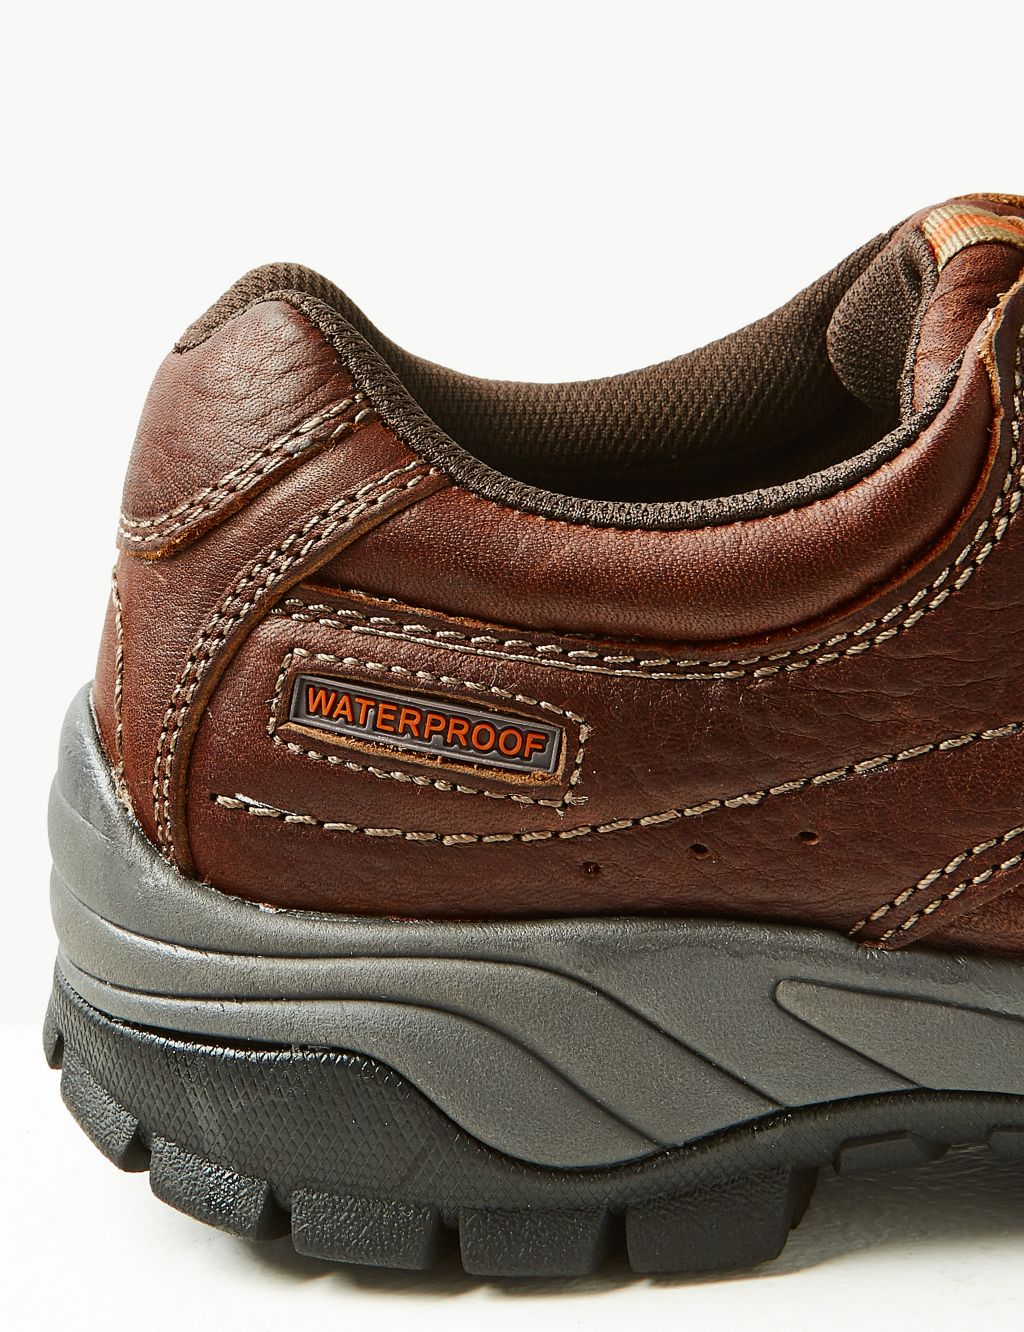 Leather Waterproof Shoes 4 of 7